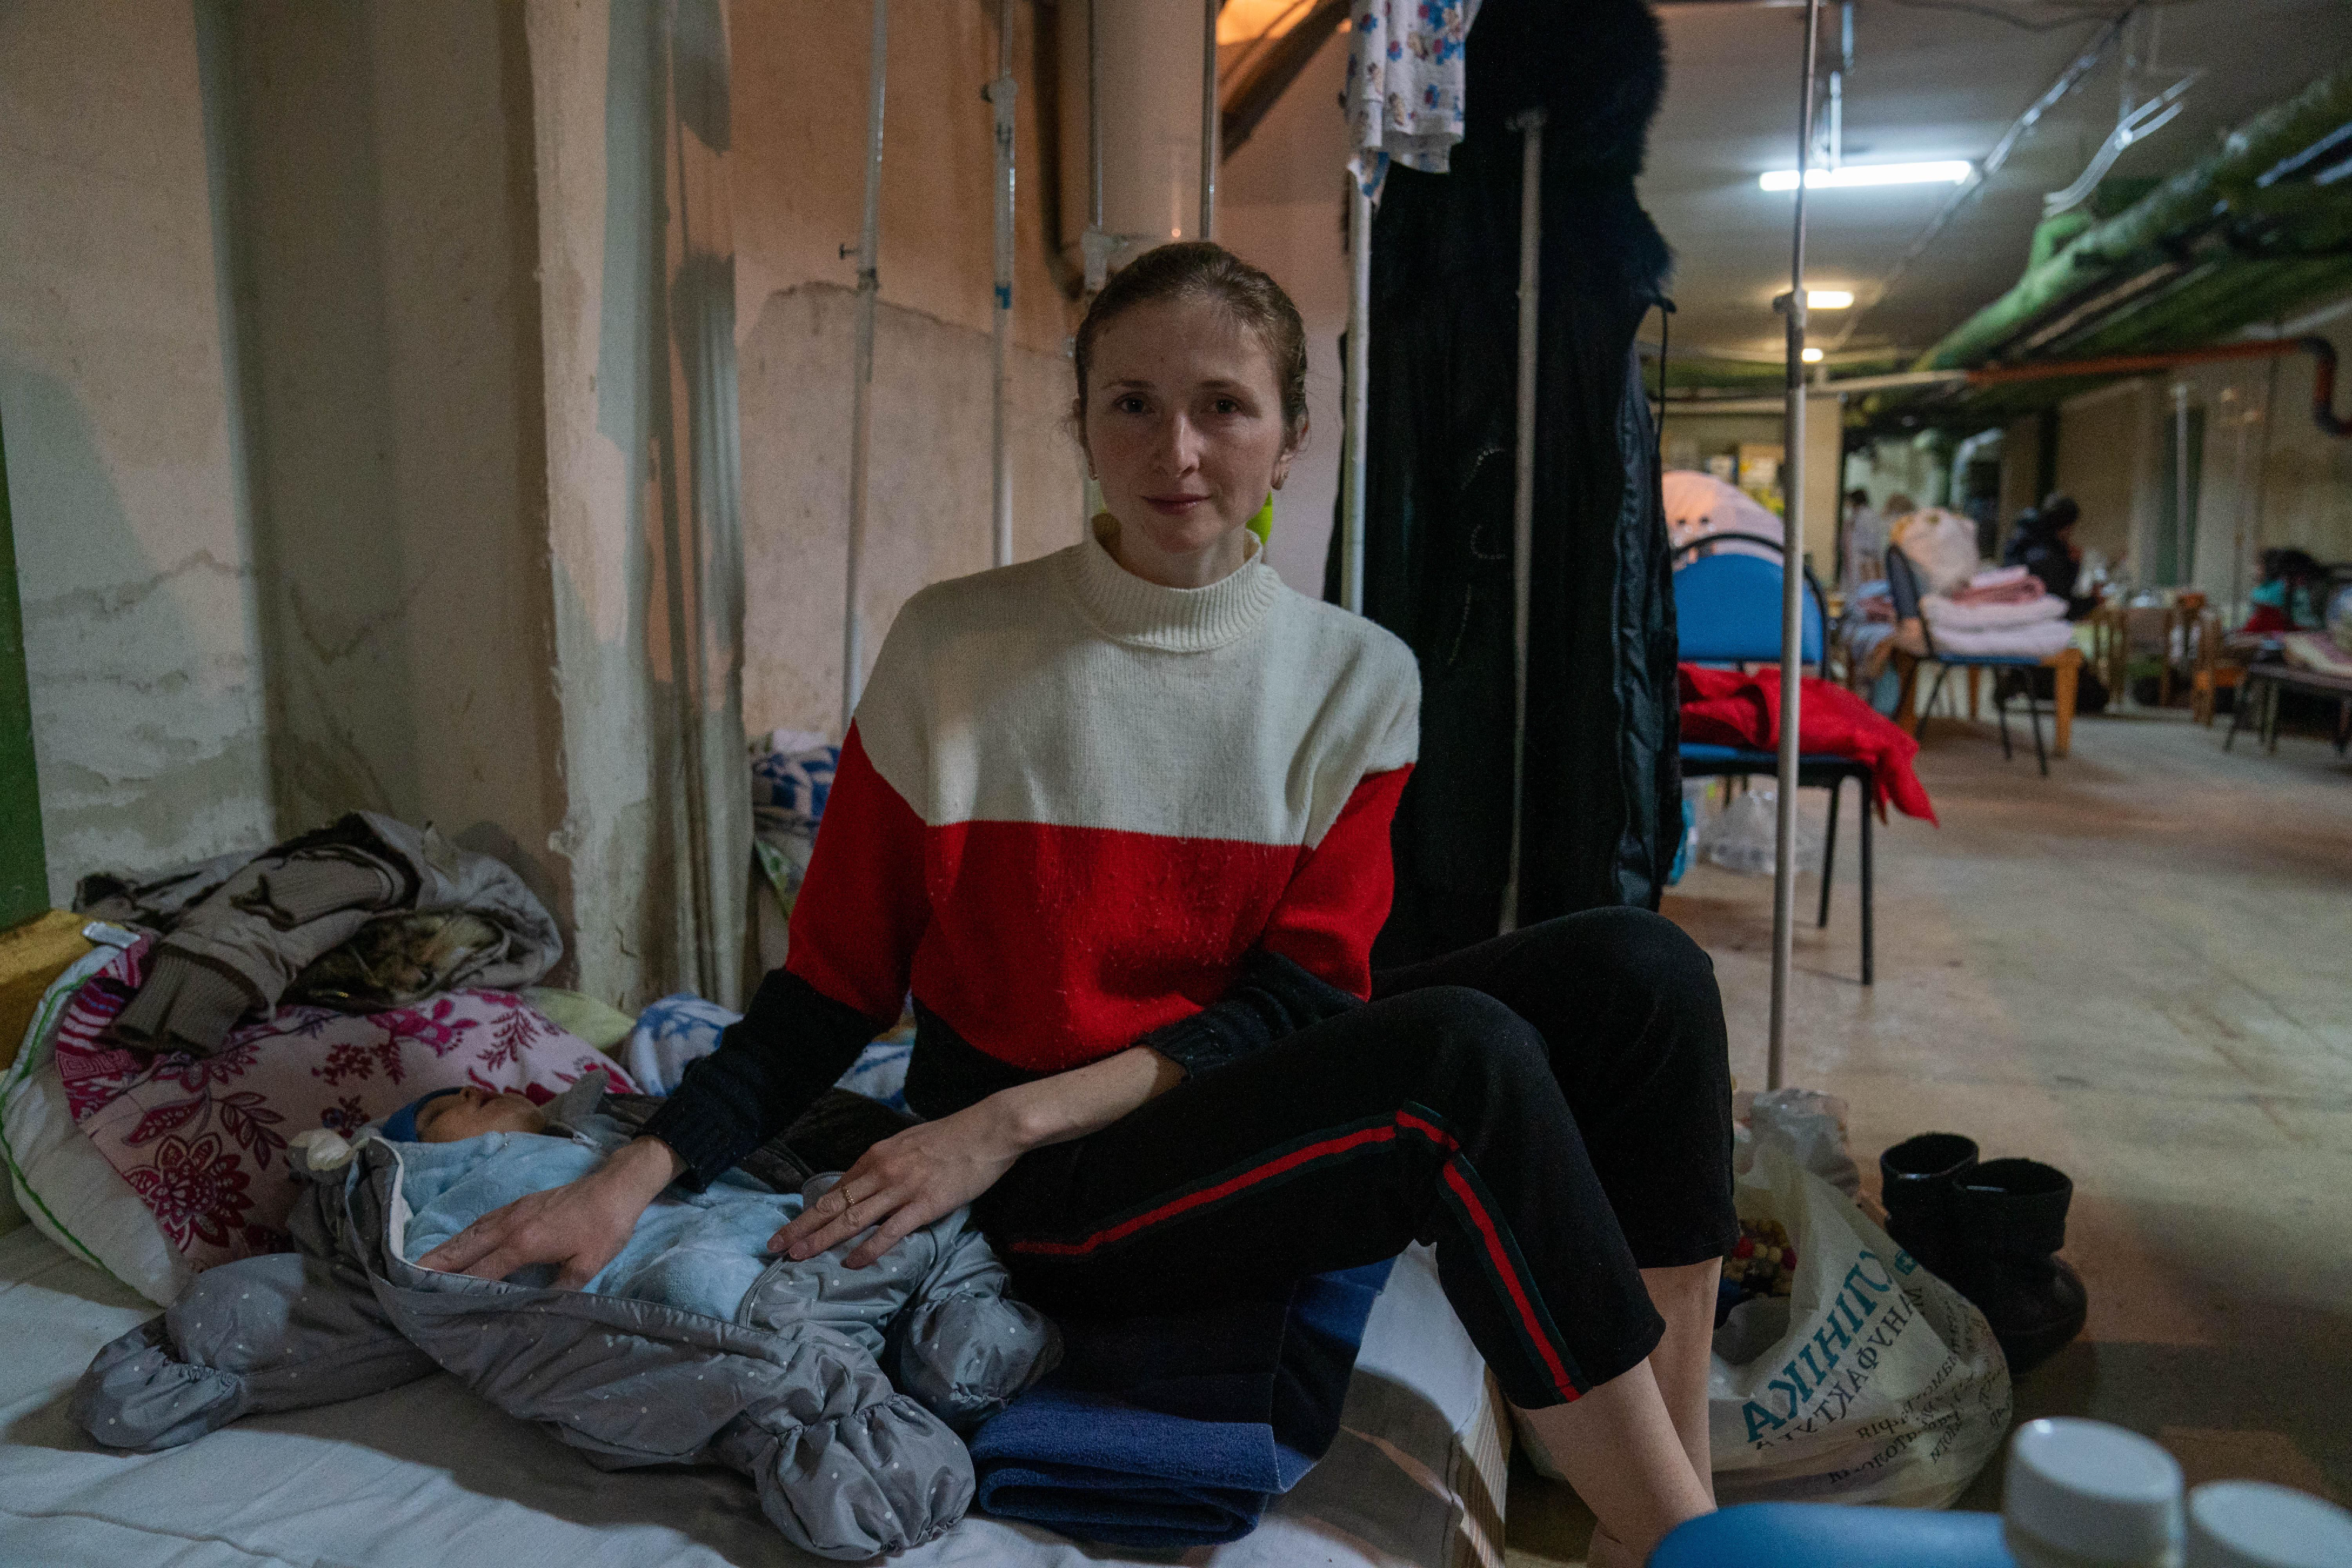 Infants and their mothers shelter in the basement of a children's hospital in Kyiv during the ongoing Russian invasion of Ukraine, February 28, 2022. Photo: Alex Lourie, Redux